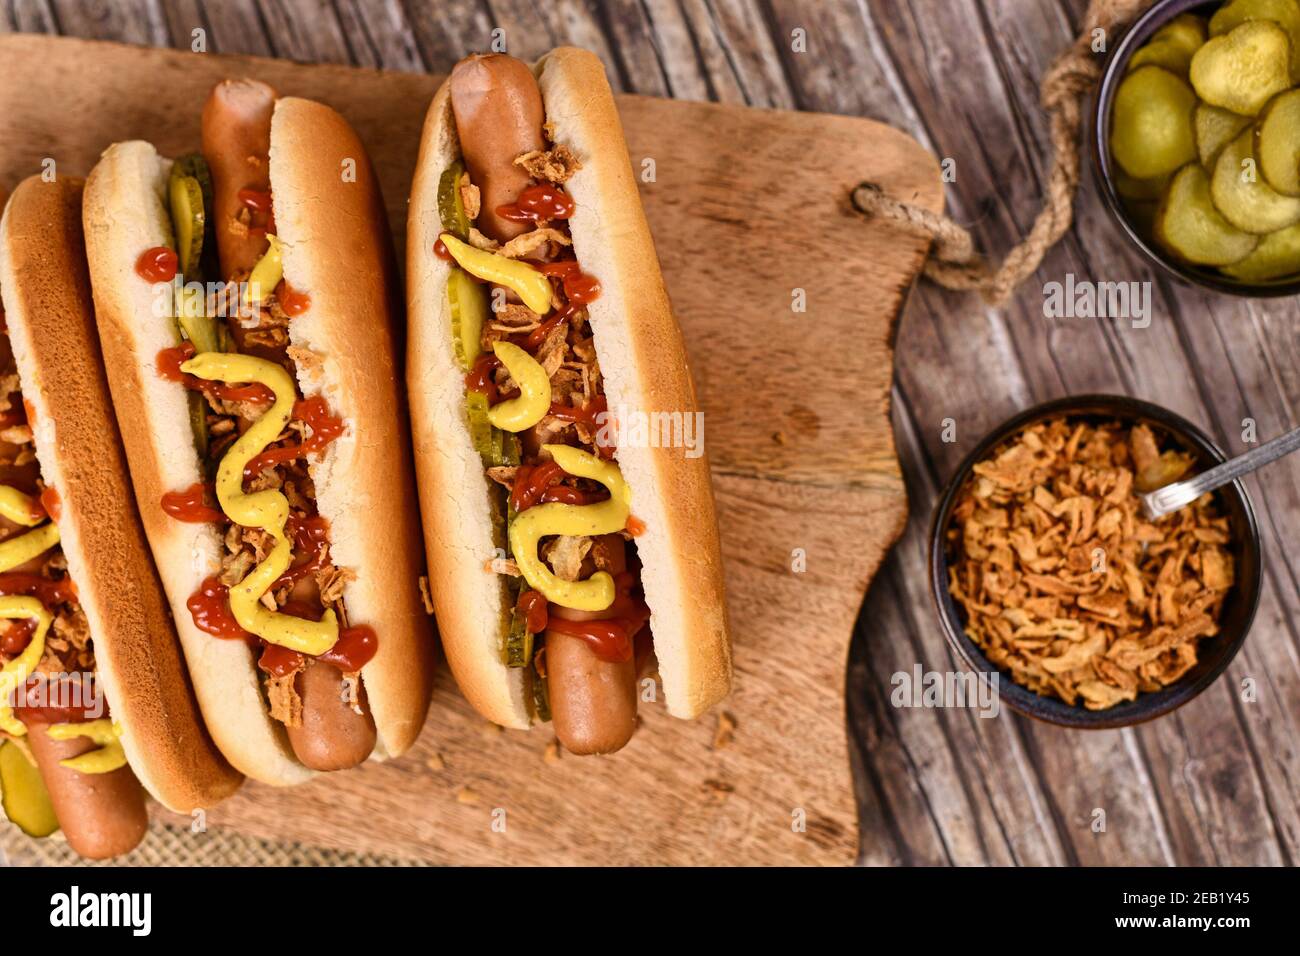 Homemade hotdogs with sausages and buns topped with preserved pickles, dried roast onions, mustard and ketchup next to bowls with ingredients Stock Photo